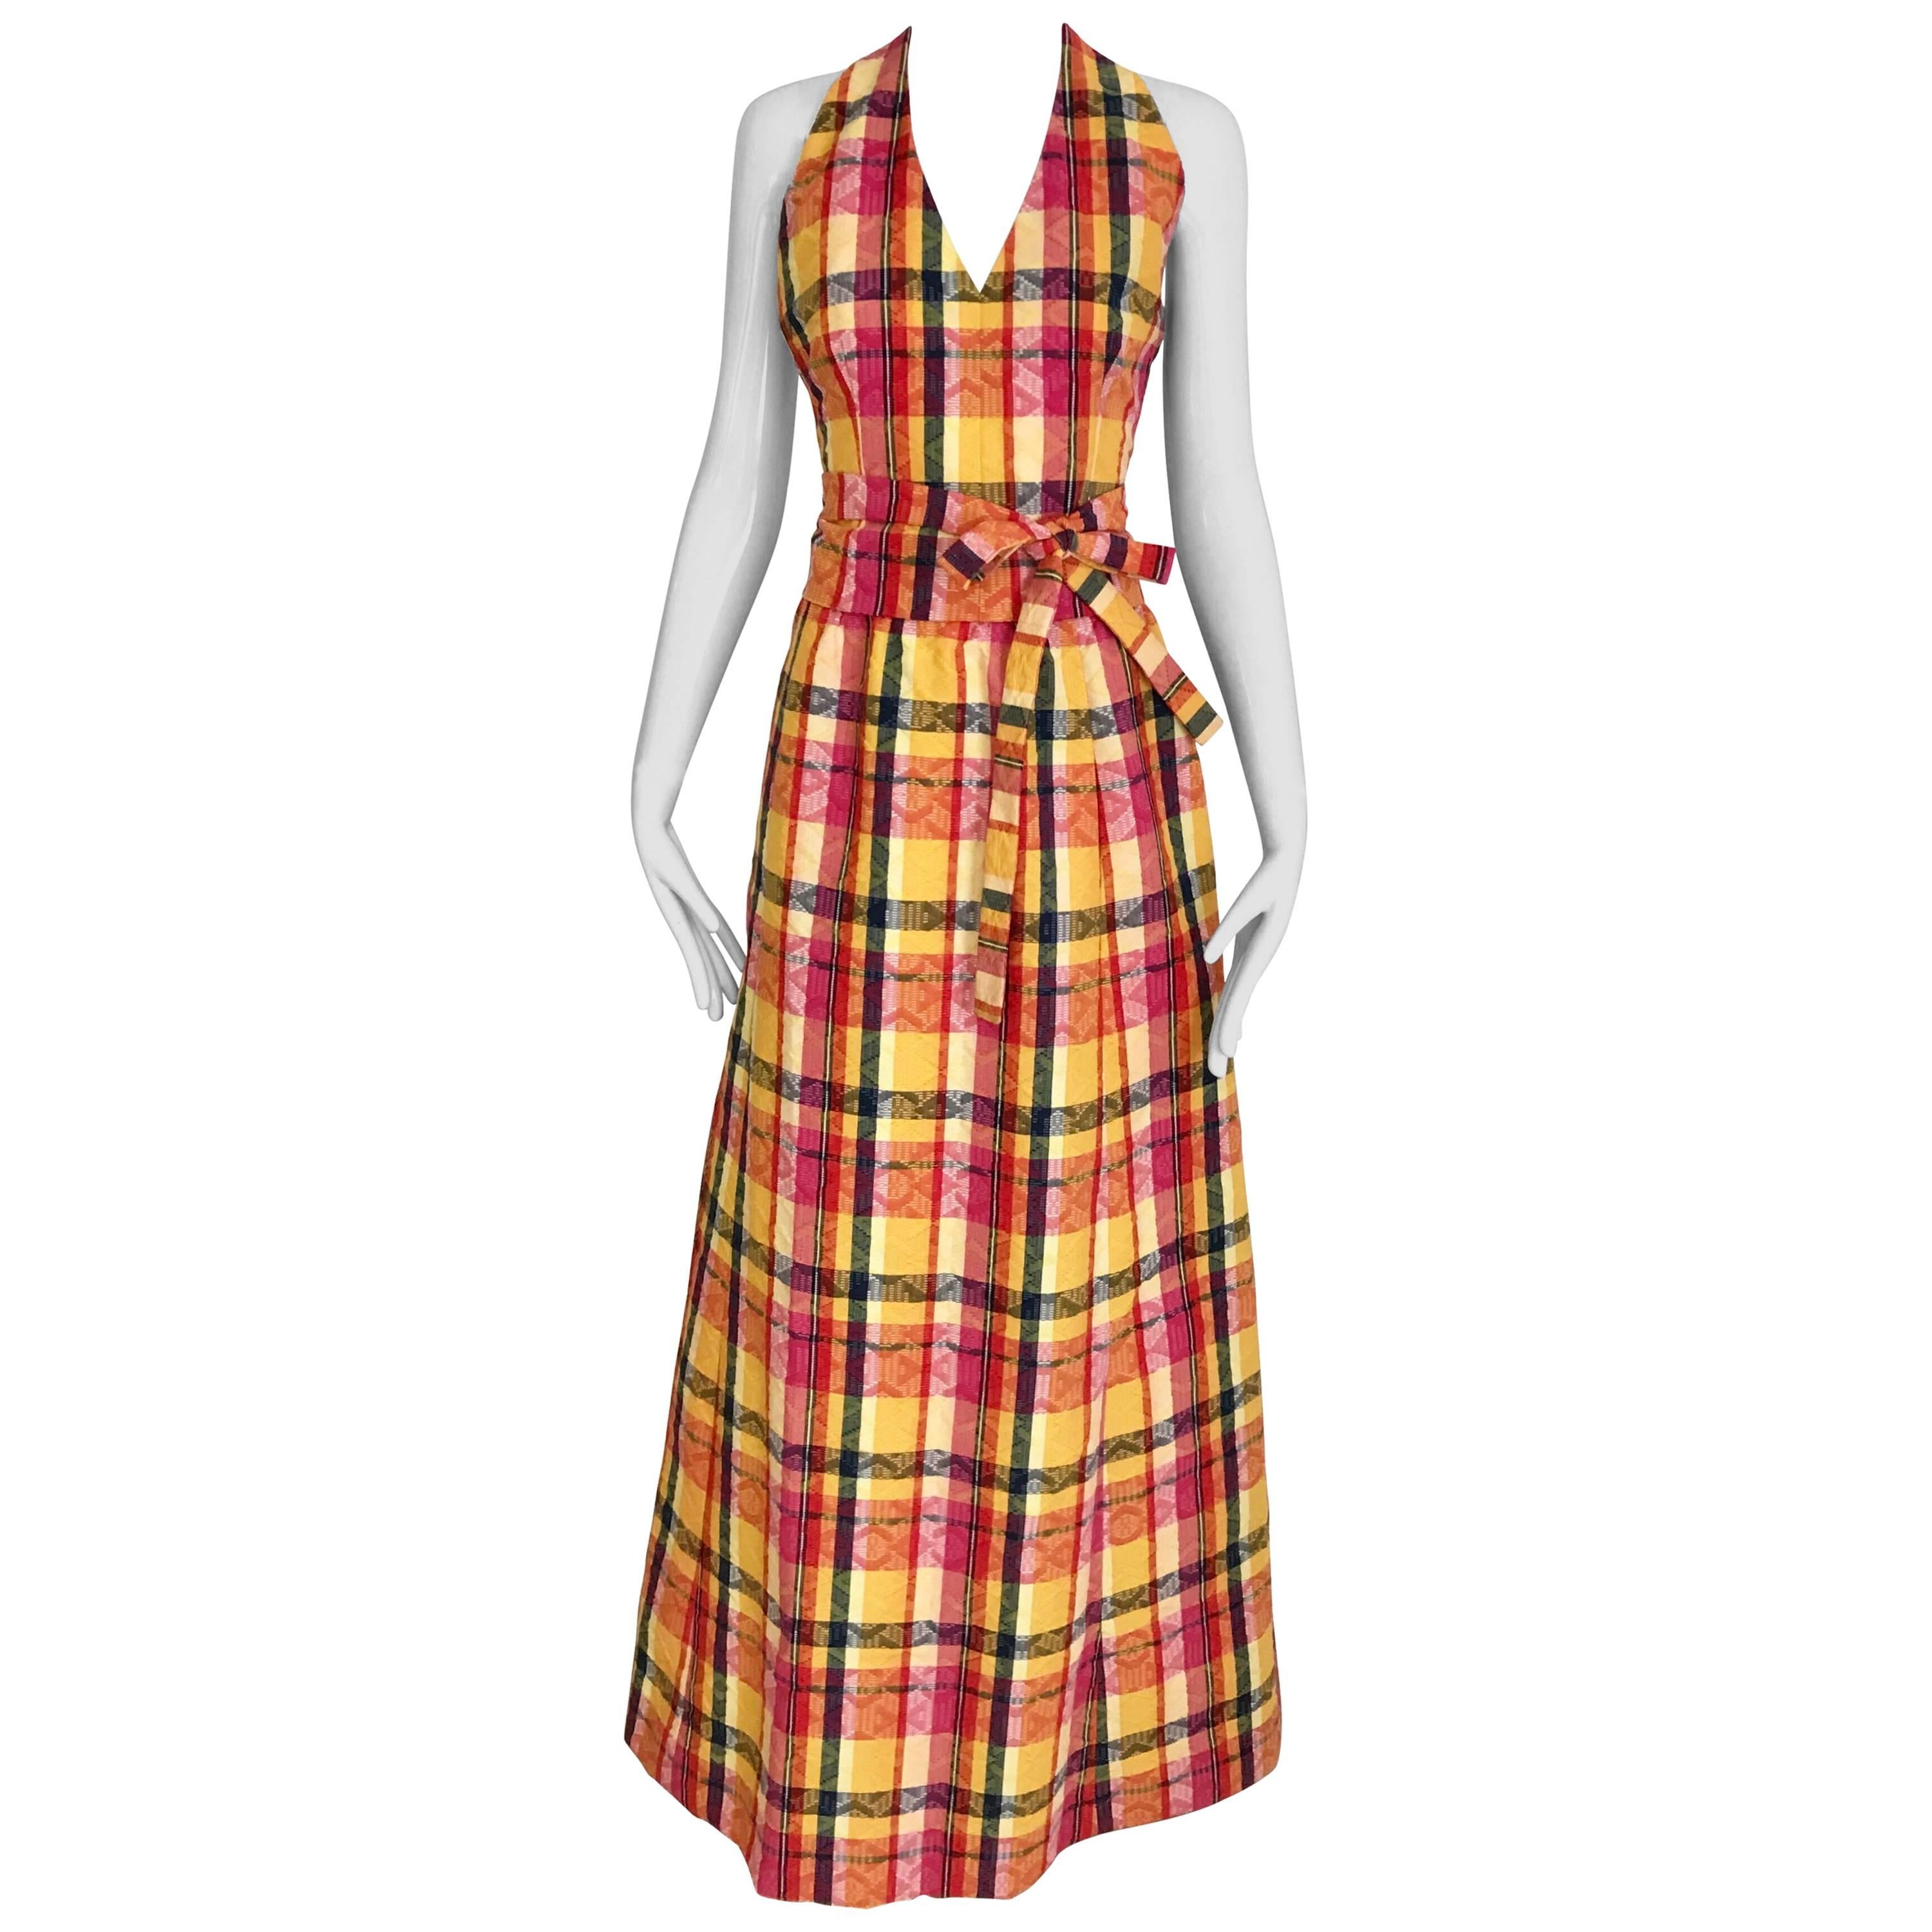 Givenchy Yellow and Orange Plaid Halter Top and Skirt set, 1970s 